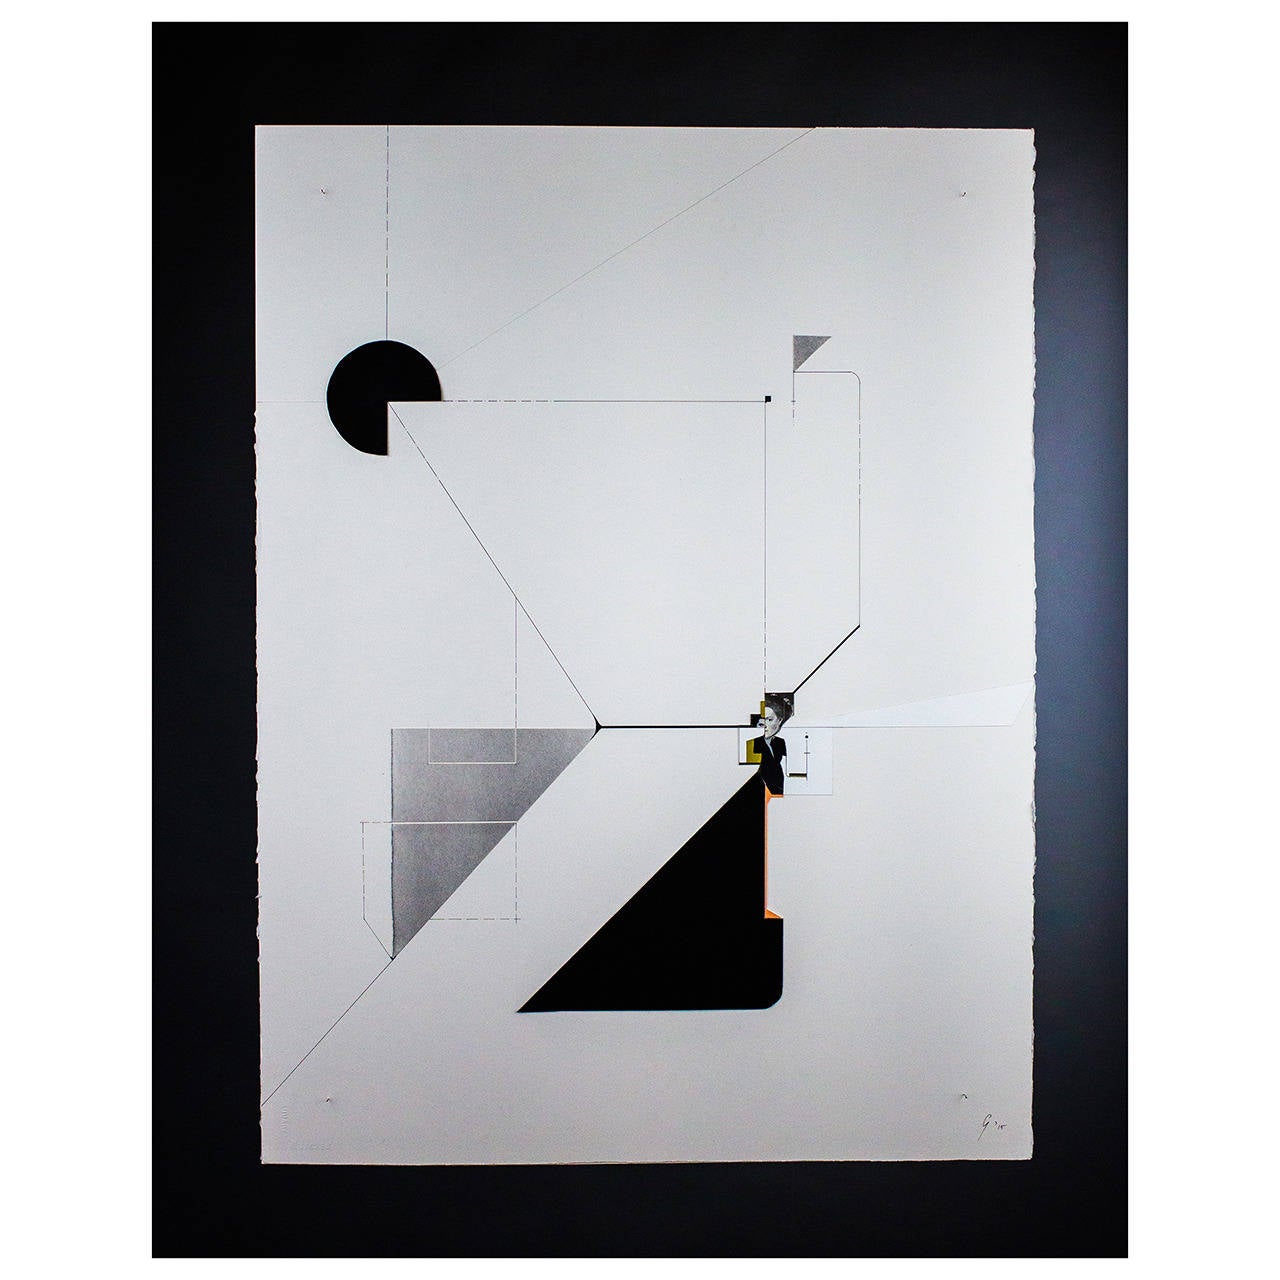 Gabriel Ann Maher, Alignment #3 "Assemblage + Line on Paper, " Holland, 2015 For Sale